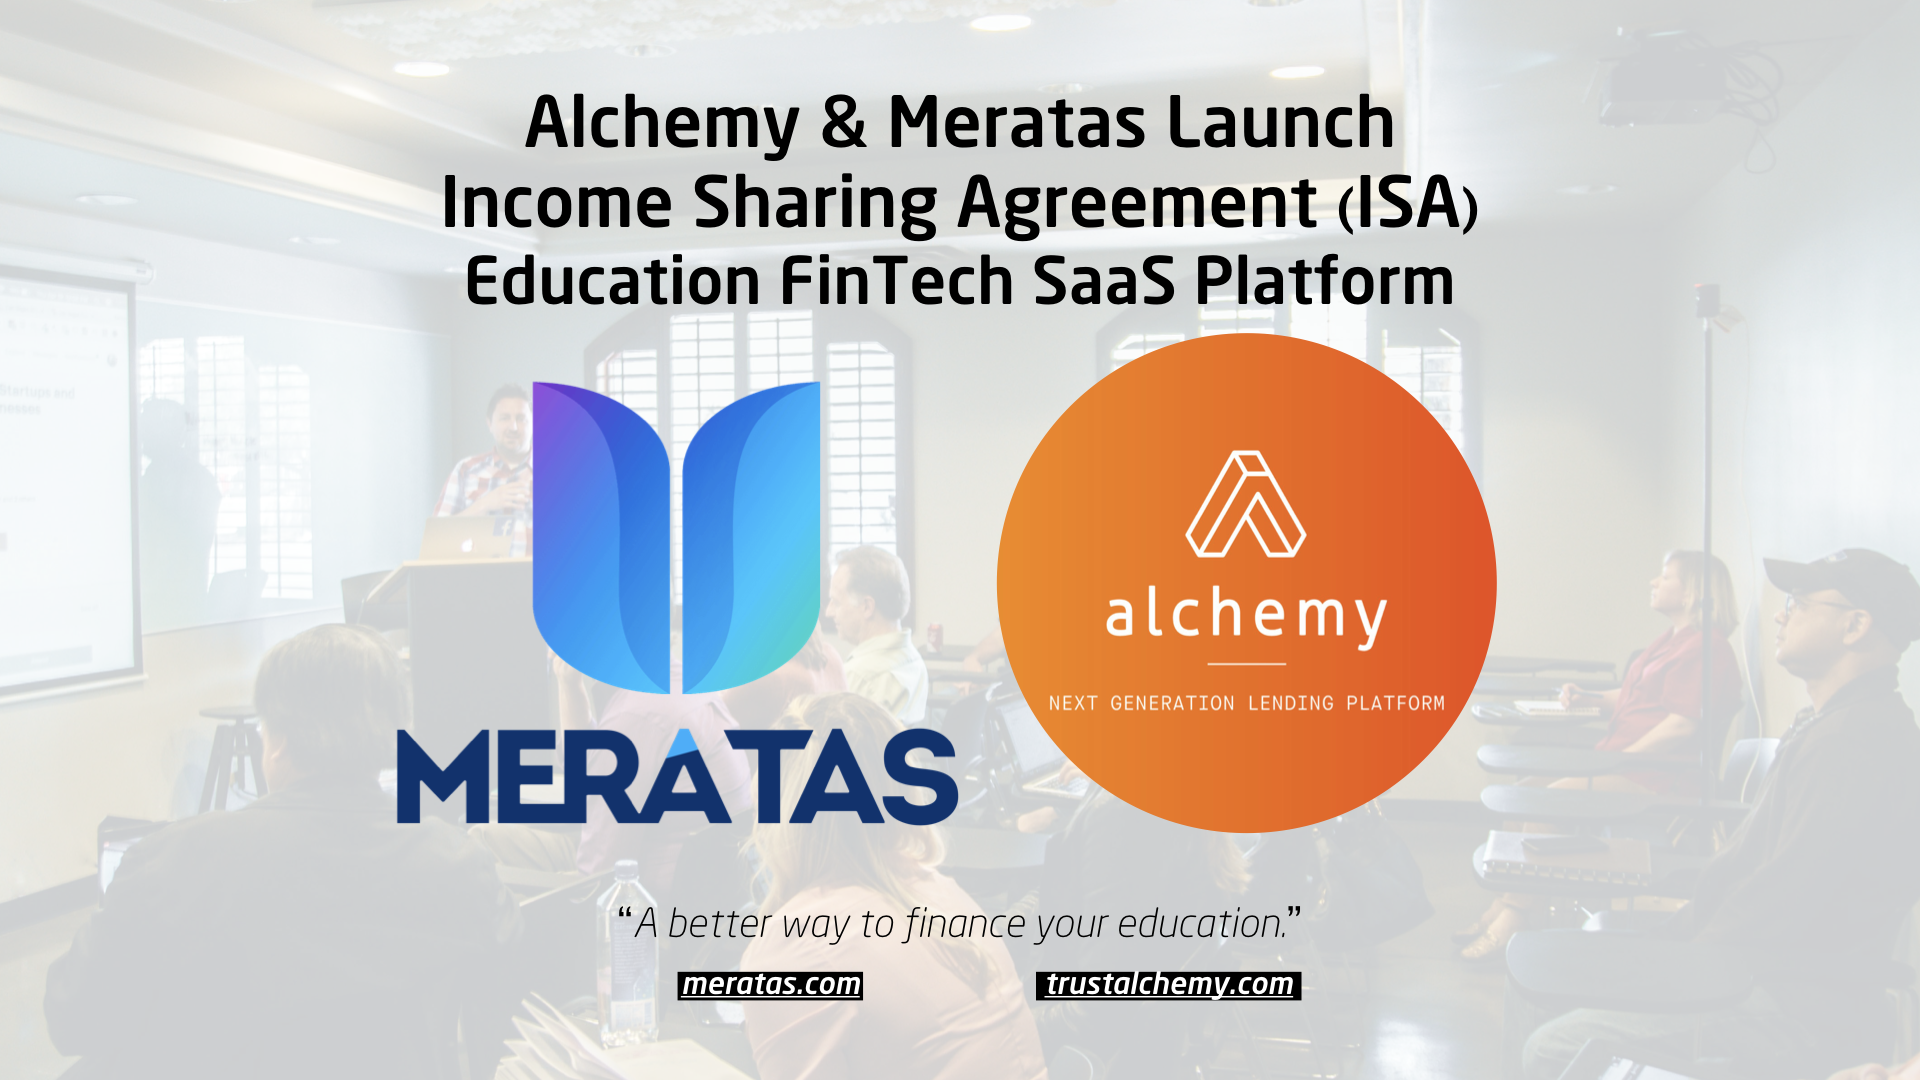 Alchemy & Meratas Launch  Income Sharing Agreement (ISA) Education FinTech SaaS Platform